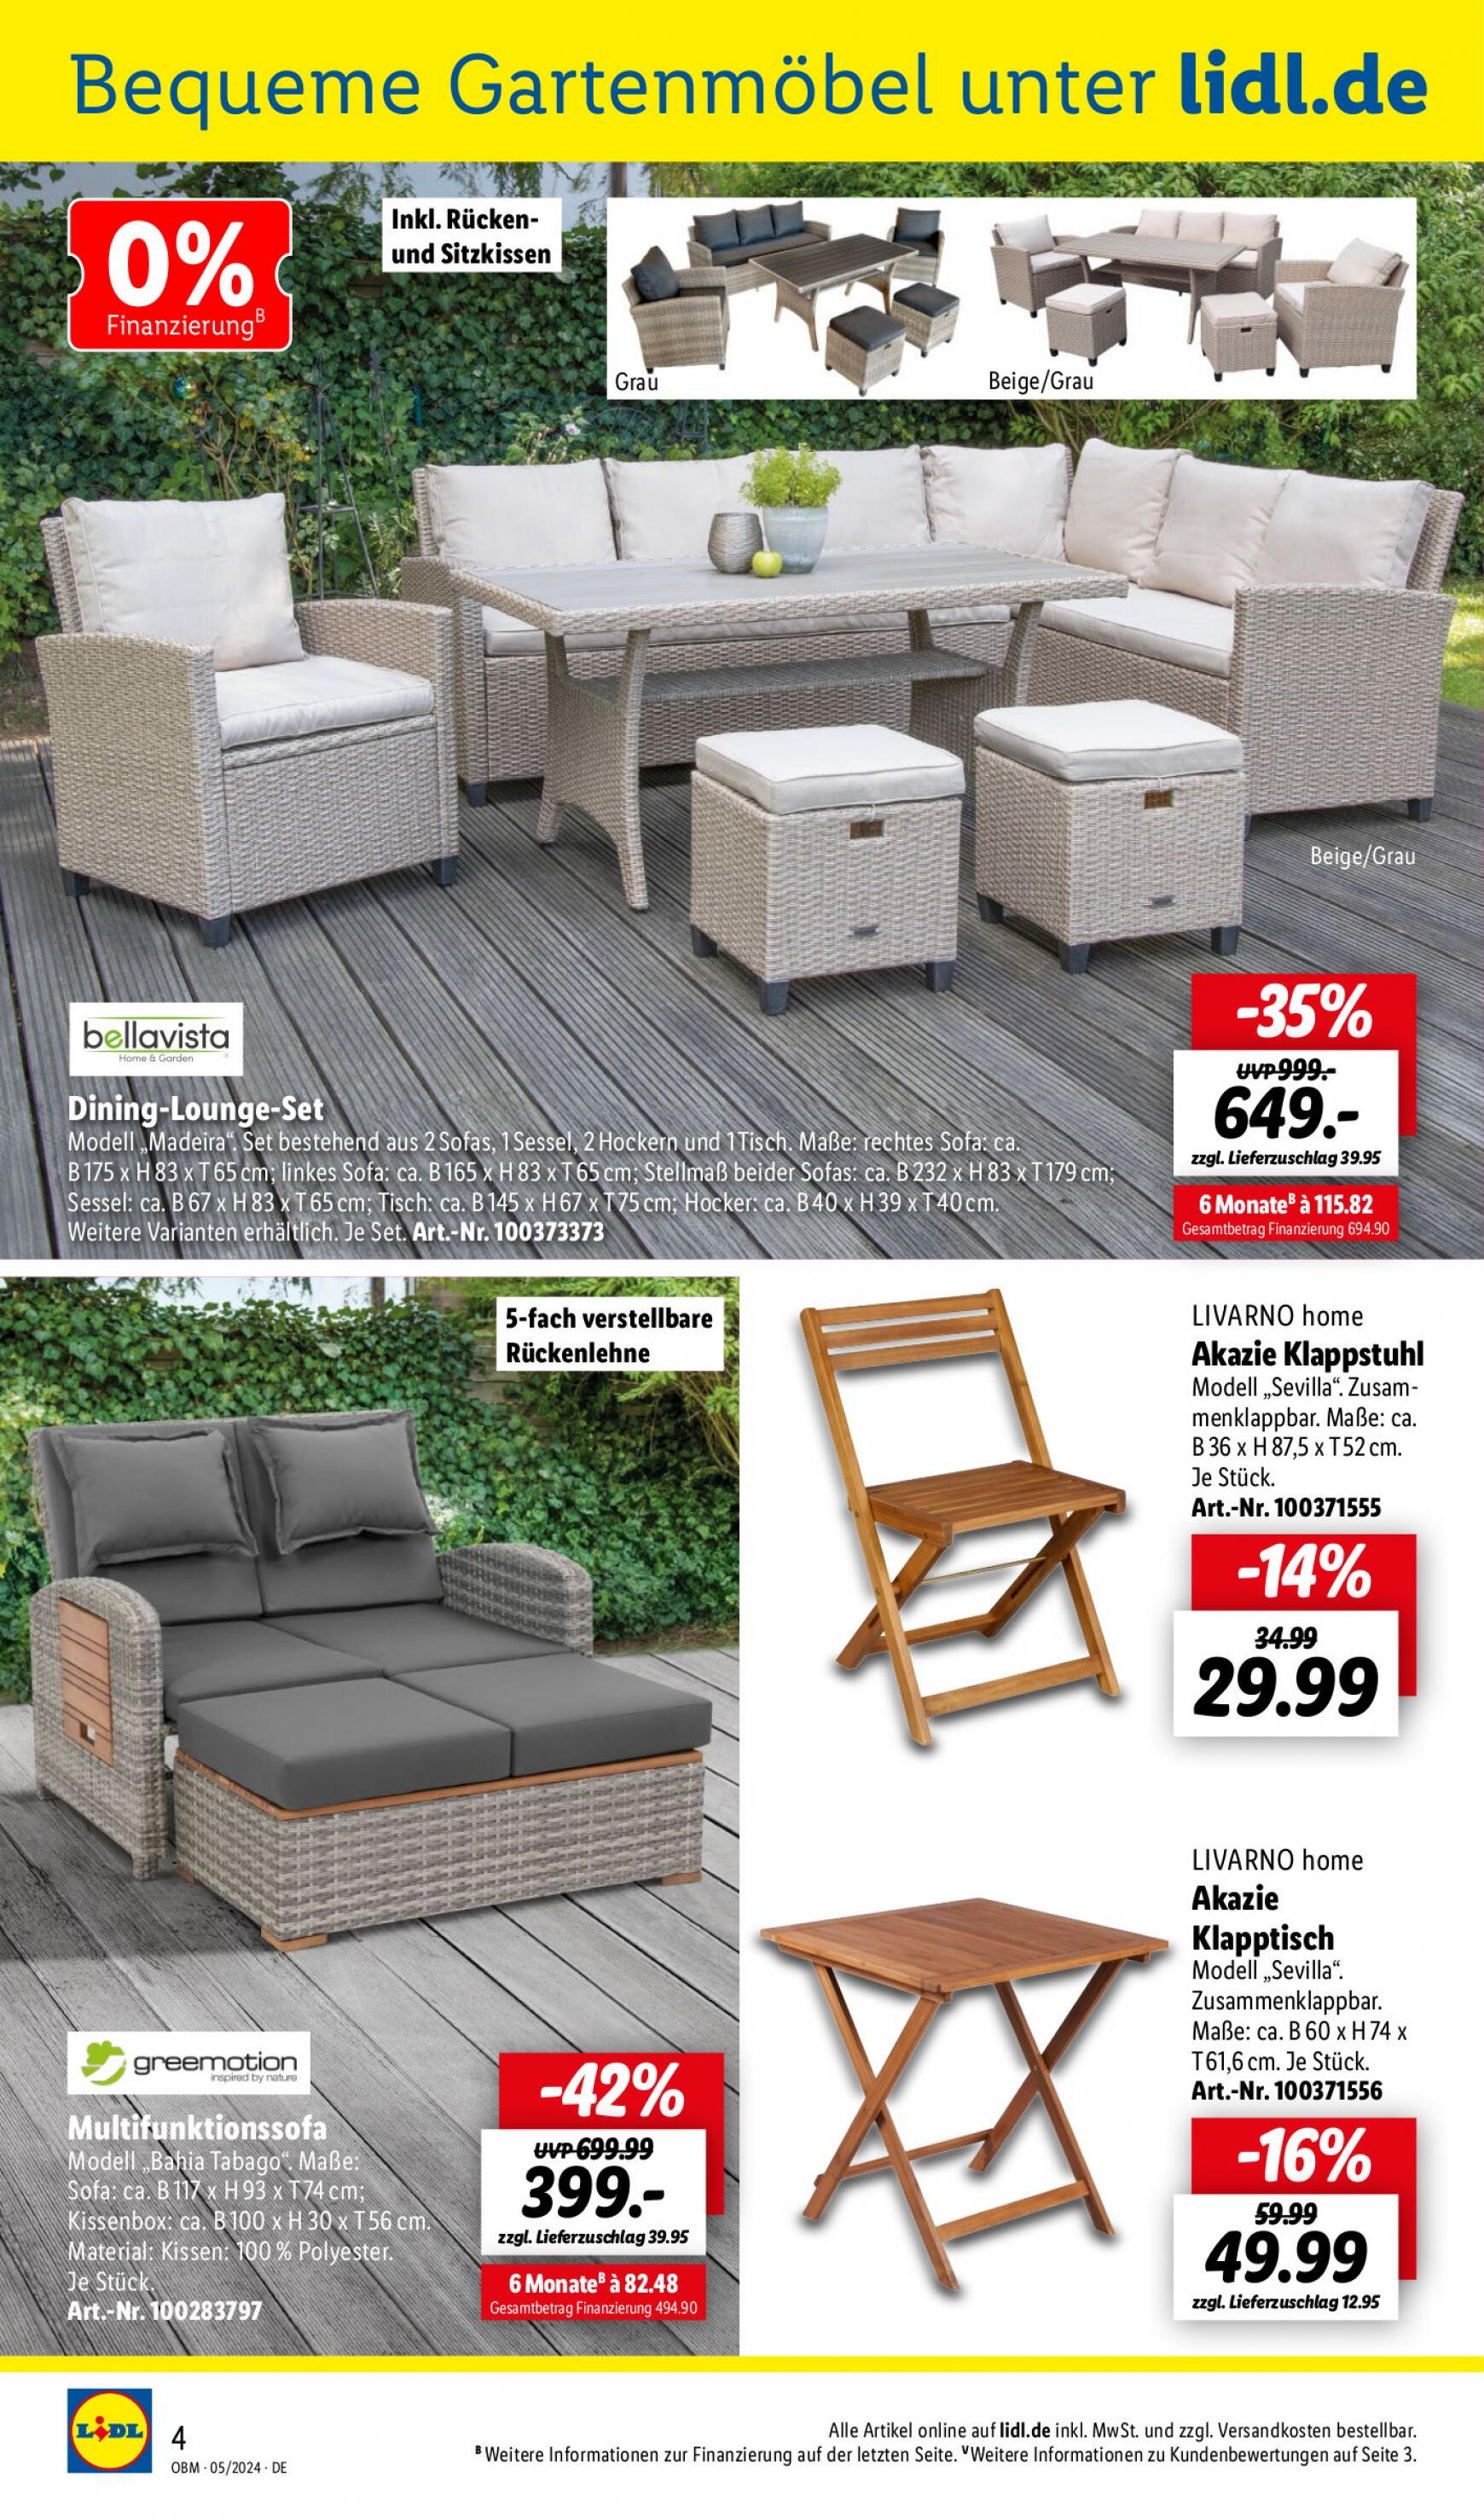 lidl - Flyer Lidl - Aktuelle Onlineshop-Highlights aktuell 01.05. - 31.05. - page: 4